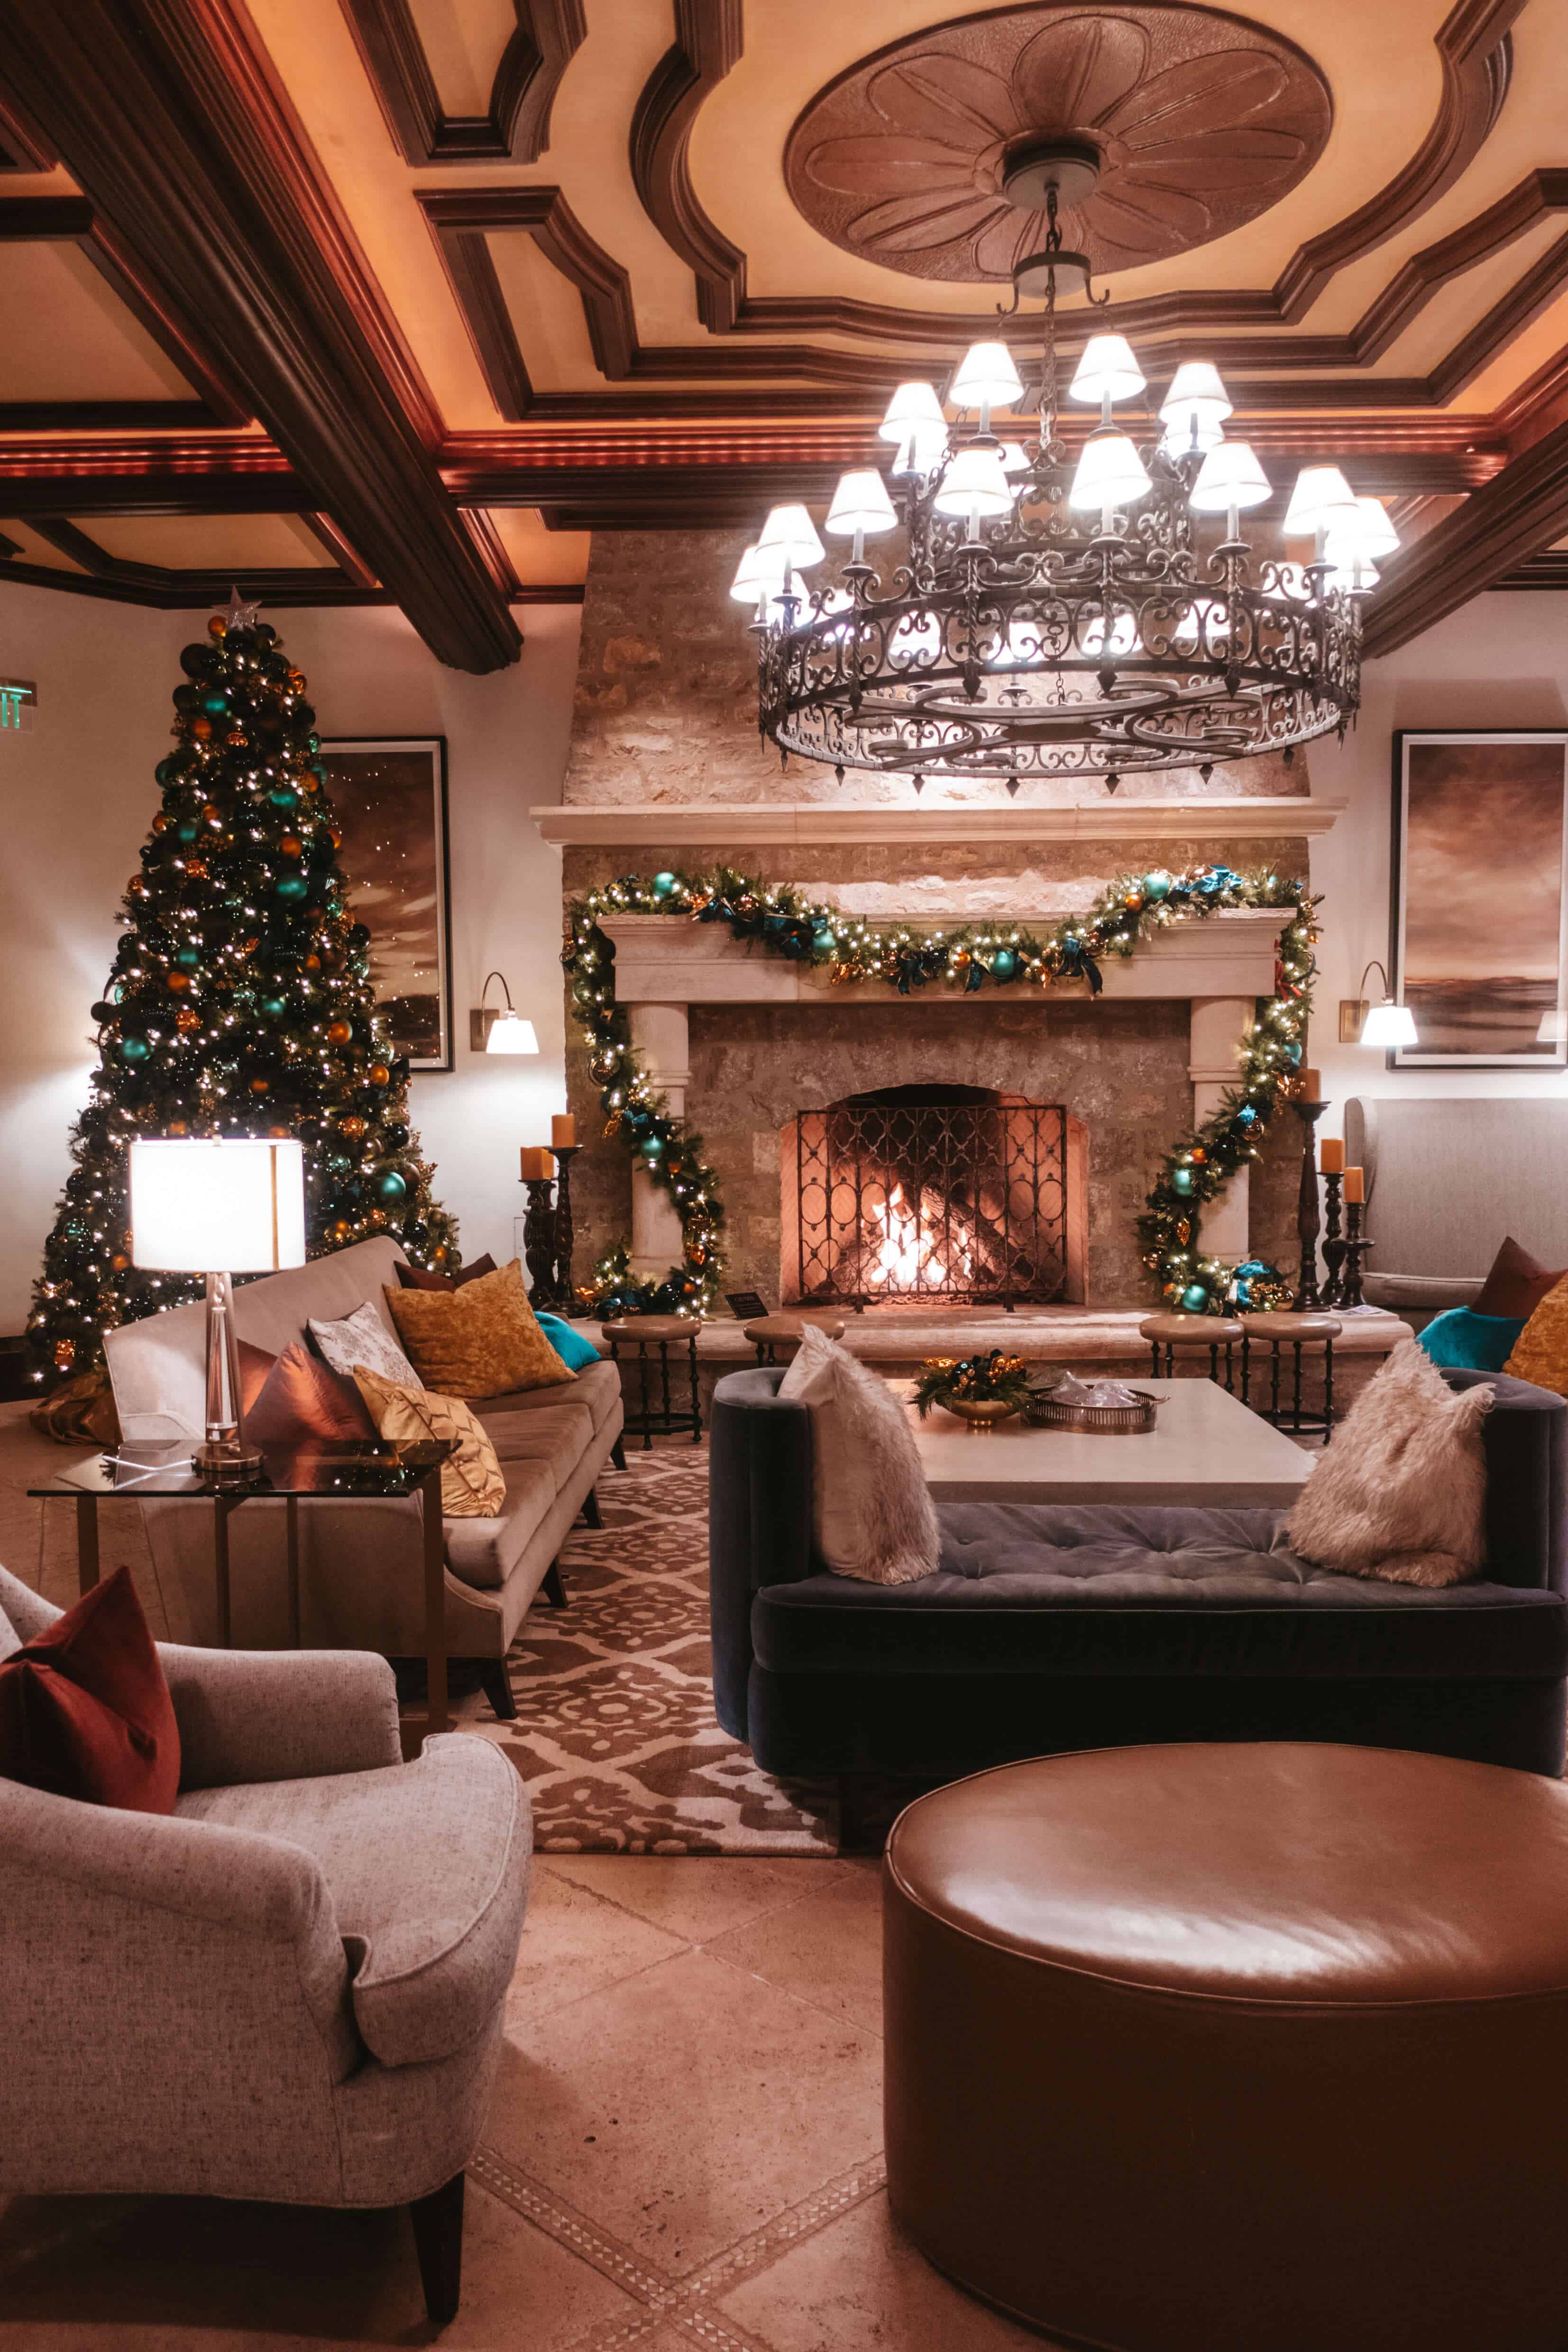 The Arabelle Hotel | The Ultimate Guide to Vail, Colorado